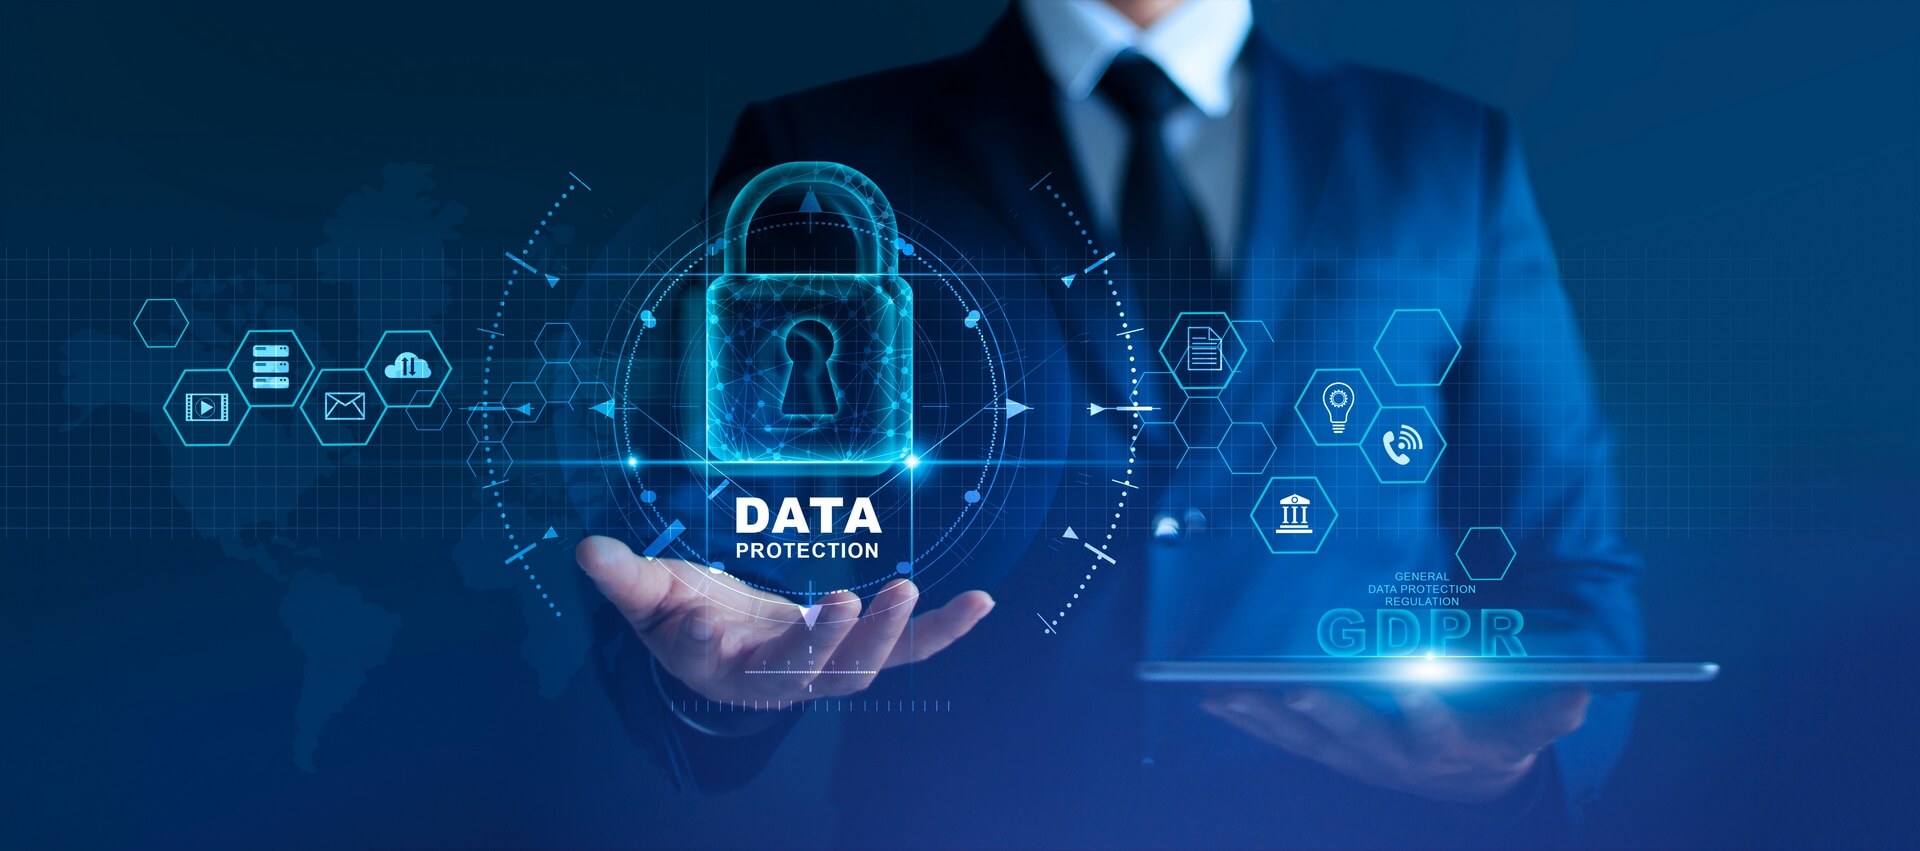 Data protection privacy concept. GDPR. EU. Cyber security network. Business man protecting data personal information on tablet. Padlock icon and internet technology networking connection on digital